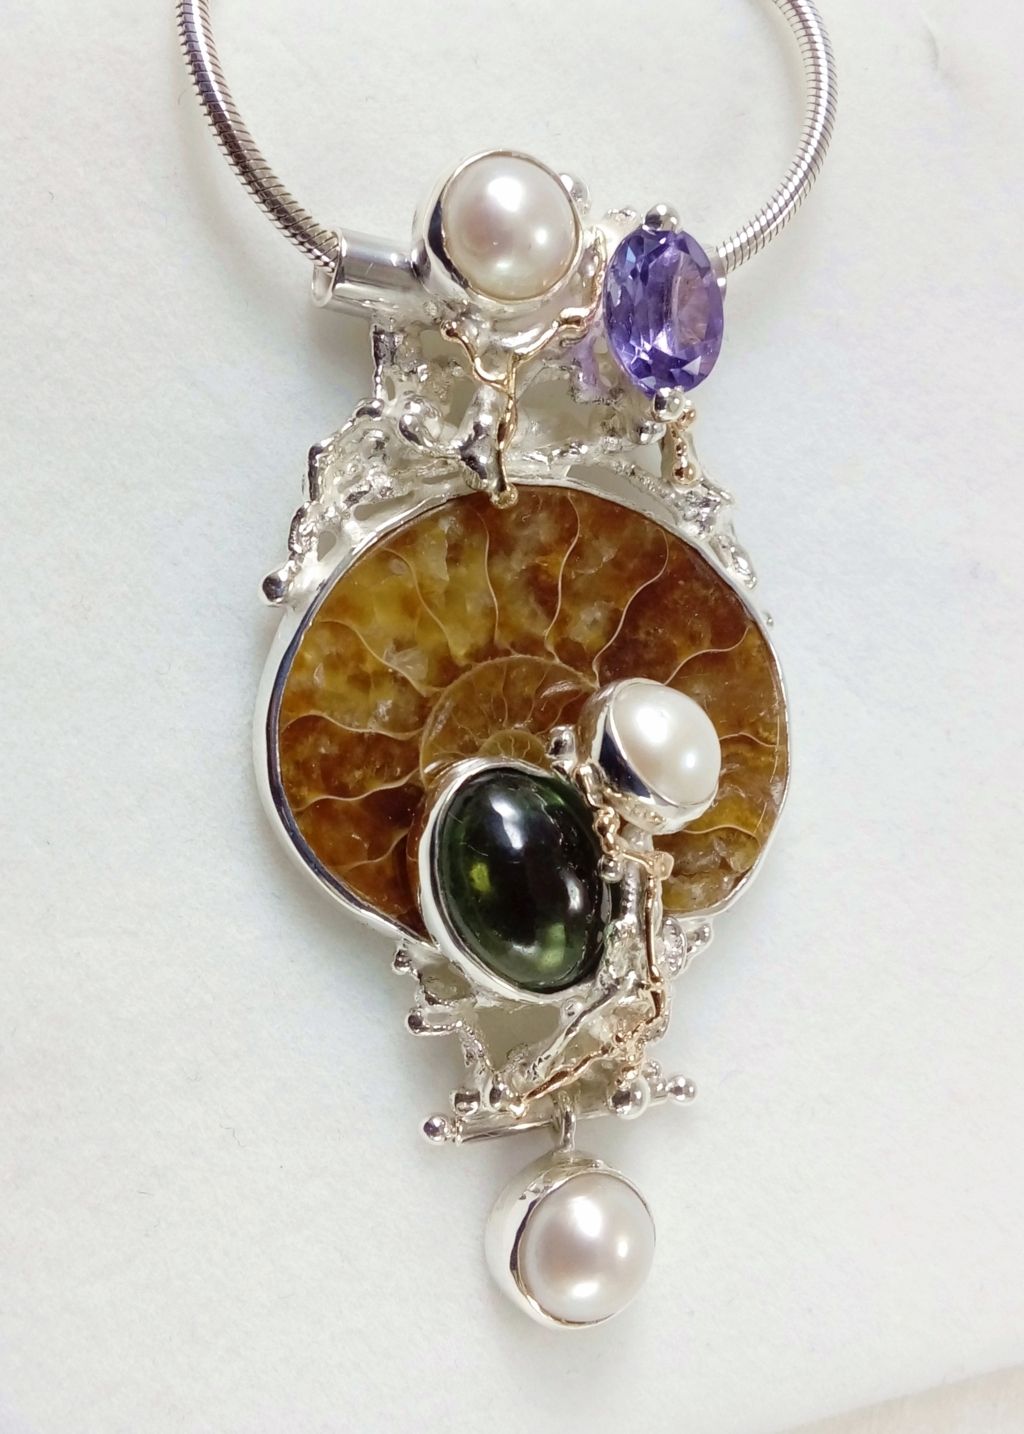 gregory pyra piro pendant 4921, art nouveau inspired fashion jewelry, jewellery with natural pearls and semi precious stones, contemporary jewelry from silver and gold, art jewellery with colour stones, contemporary jewelry with pearls and color stones, jewellery made from silver and gold with natural pearls and natural gemstones, shopping for diamonds and designer jewellery, accessories with color stones and pearls, artisan handcrafted jewellery with natural gemstones and natural pearls, jewelry made first hand, pendant with a vintage inspired design, sterling silver and 14 karat gold pendant, pendant with faceted amethyst and fluorite, pendant with amethyst and ammonite, pendant with ammonite and fluorite, one of a kind handcrafted ring, where to find auctions with fine art and designer jewellery, where to buy gregory pyra piro jewelry right now